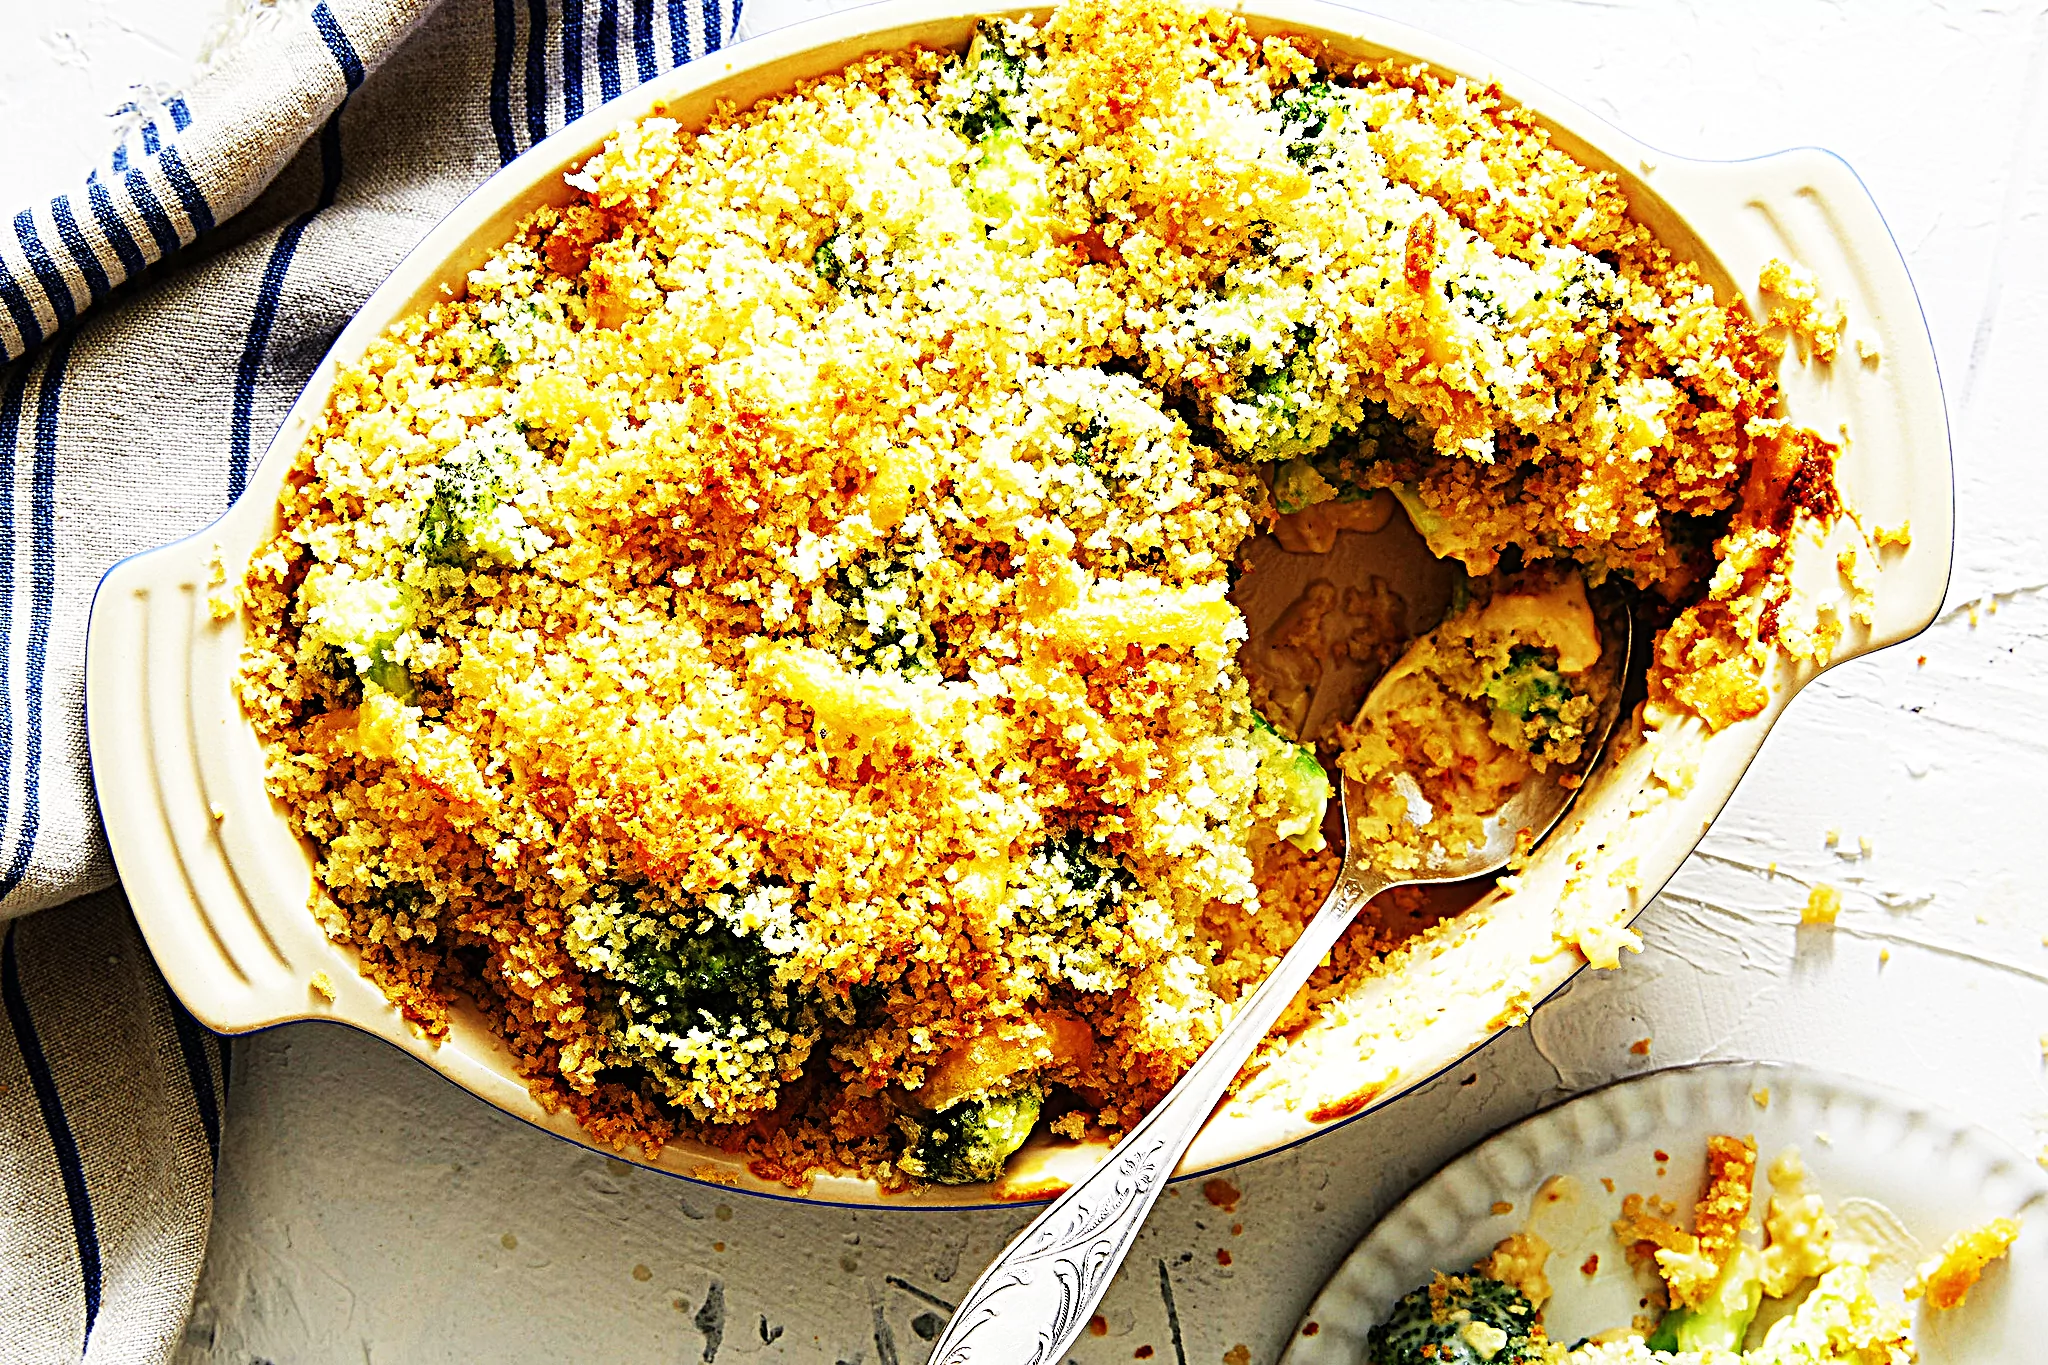 Stupid-Easy Recipe for Broccoli Gratin with Cheesy Breadcrumbs (#1 Top-Rated)